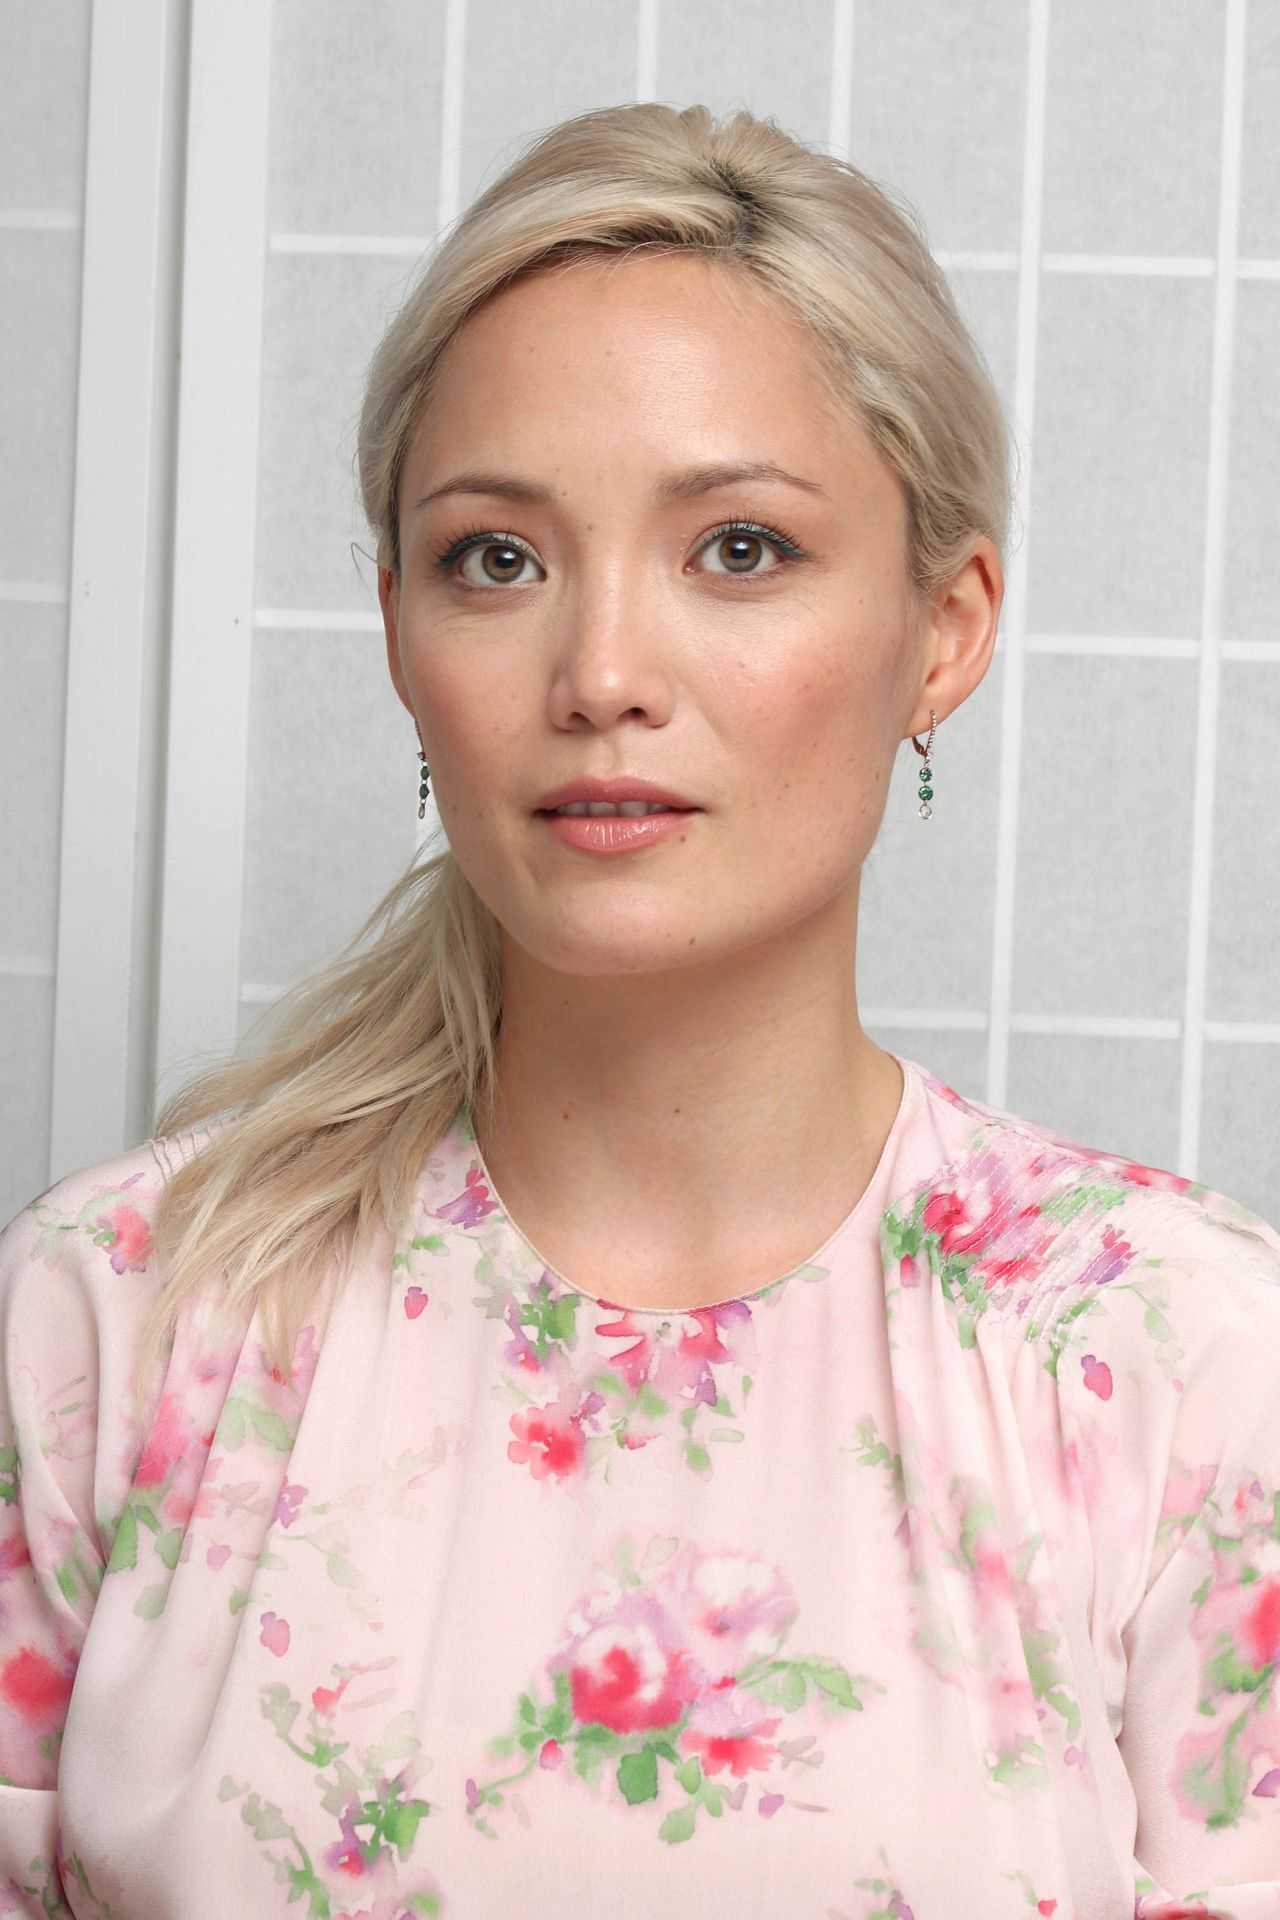 70+ Hot Pictures Of Pom Klementieff Who Plays Mantis In Marvel Cinematic Universe 131